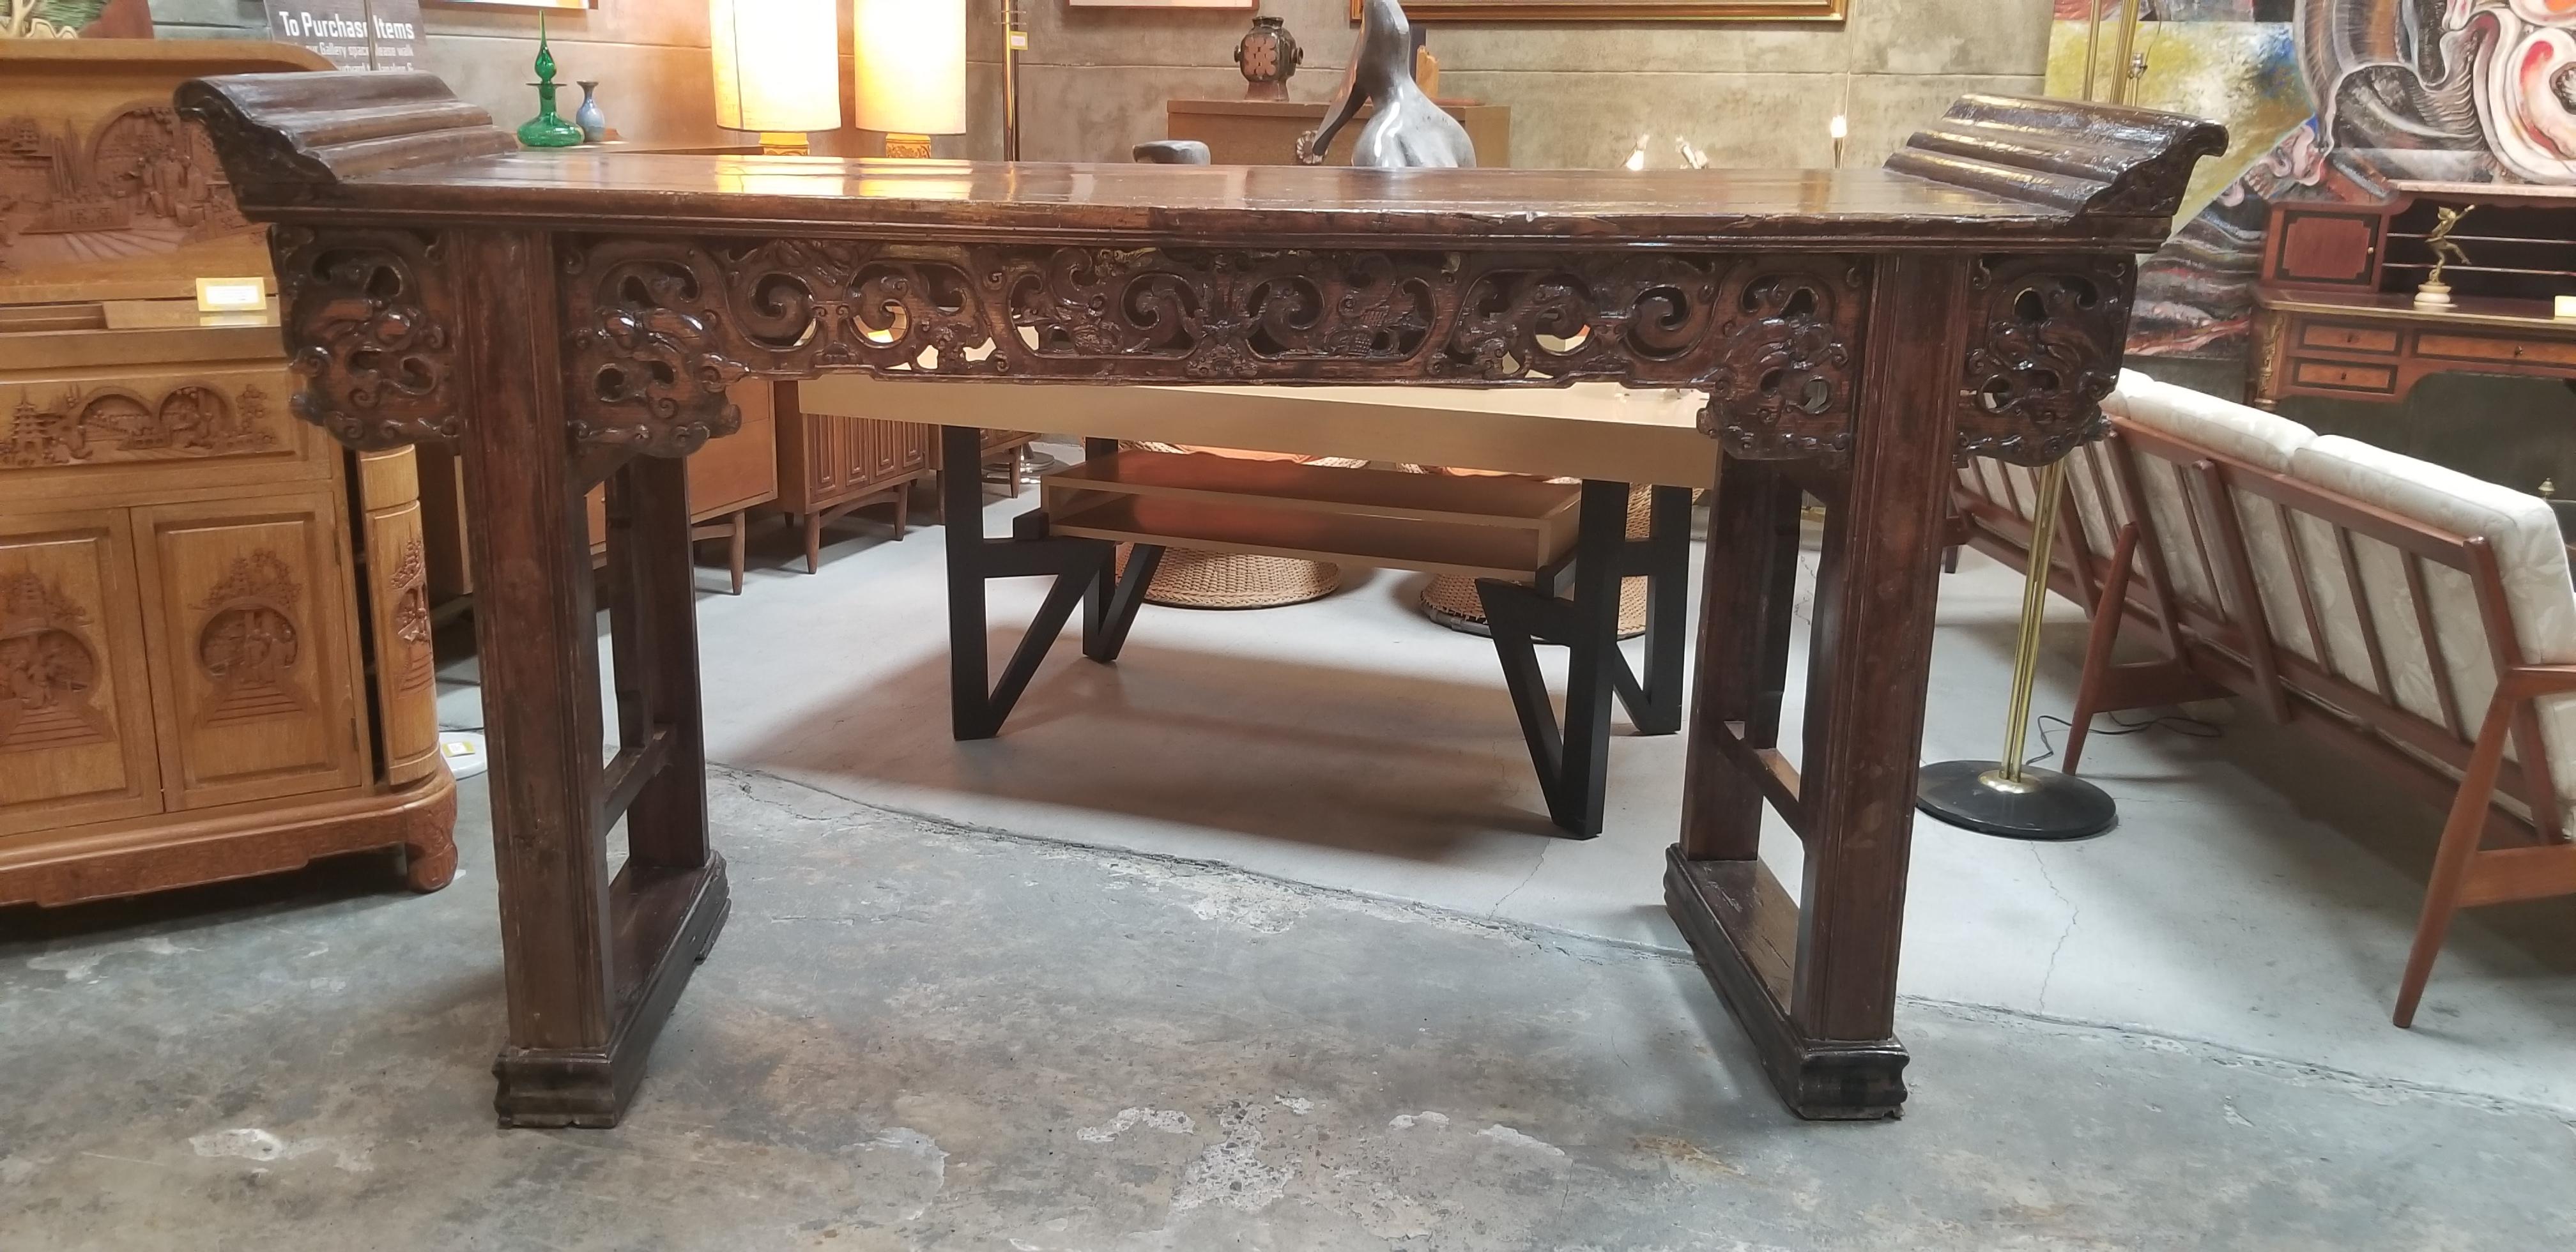 Grand-Scale Qing Dynasty Alter Table In Distressed Condition For Sale In Fulton, CA